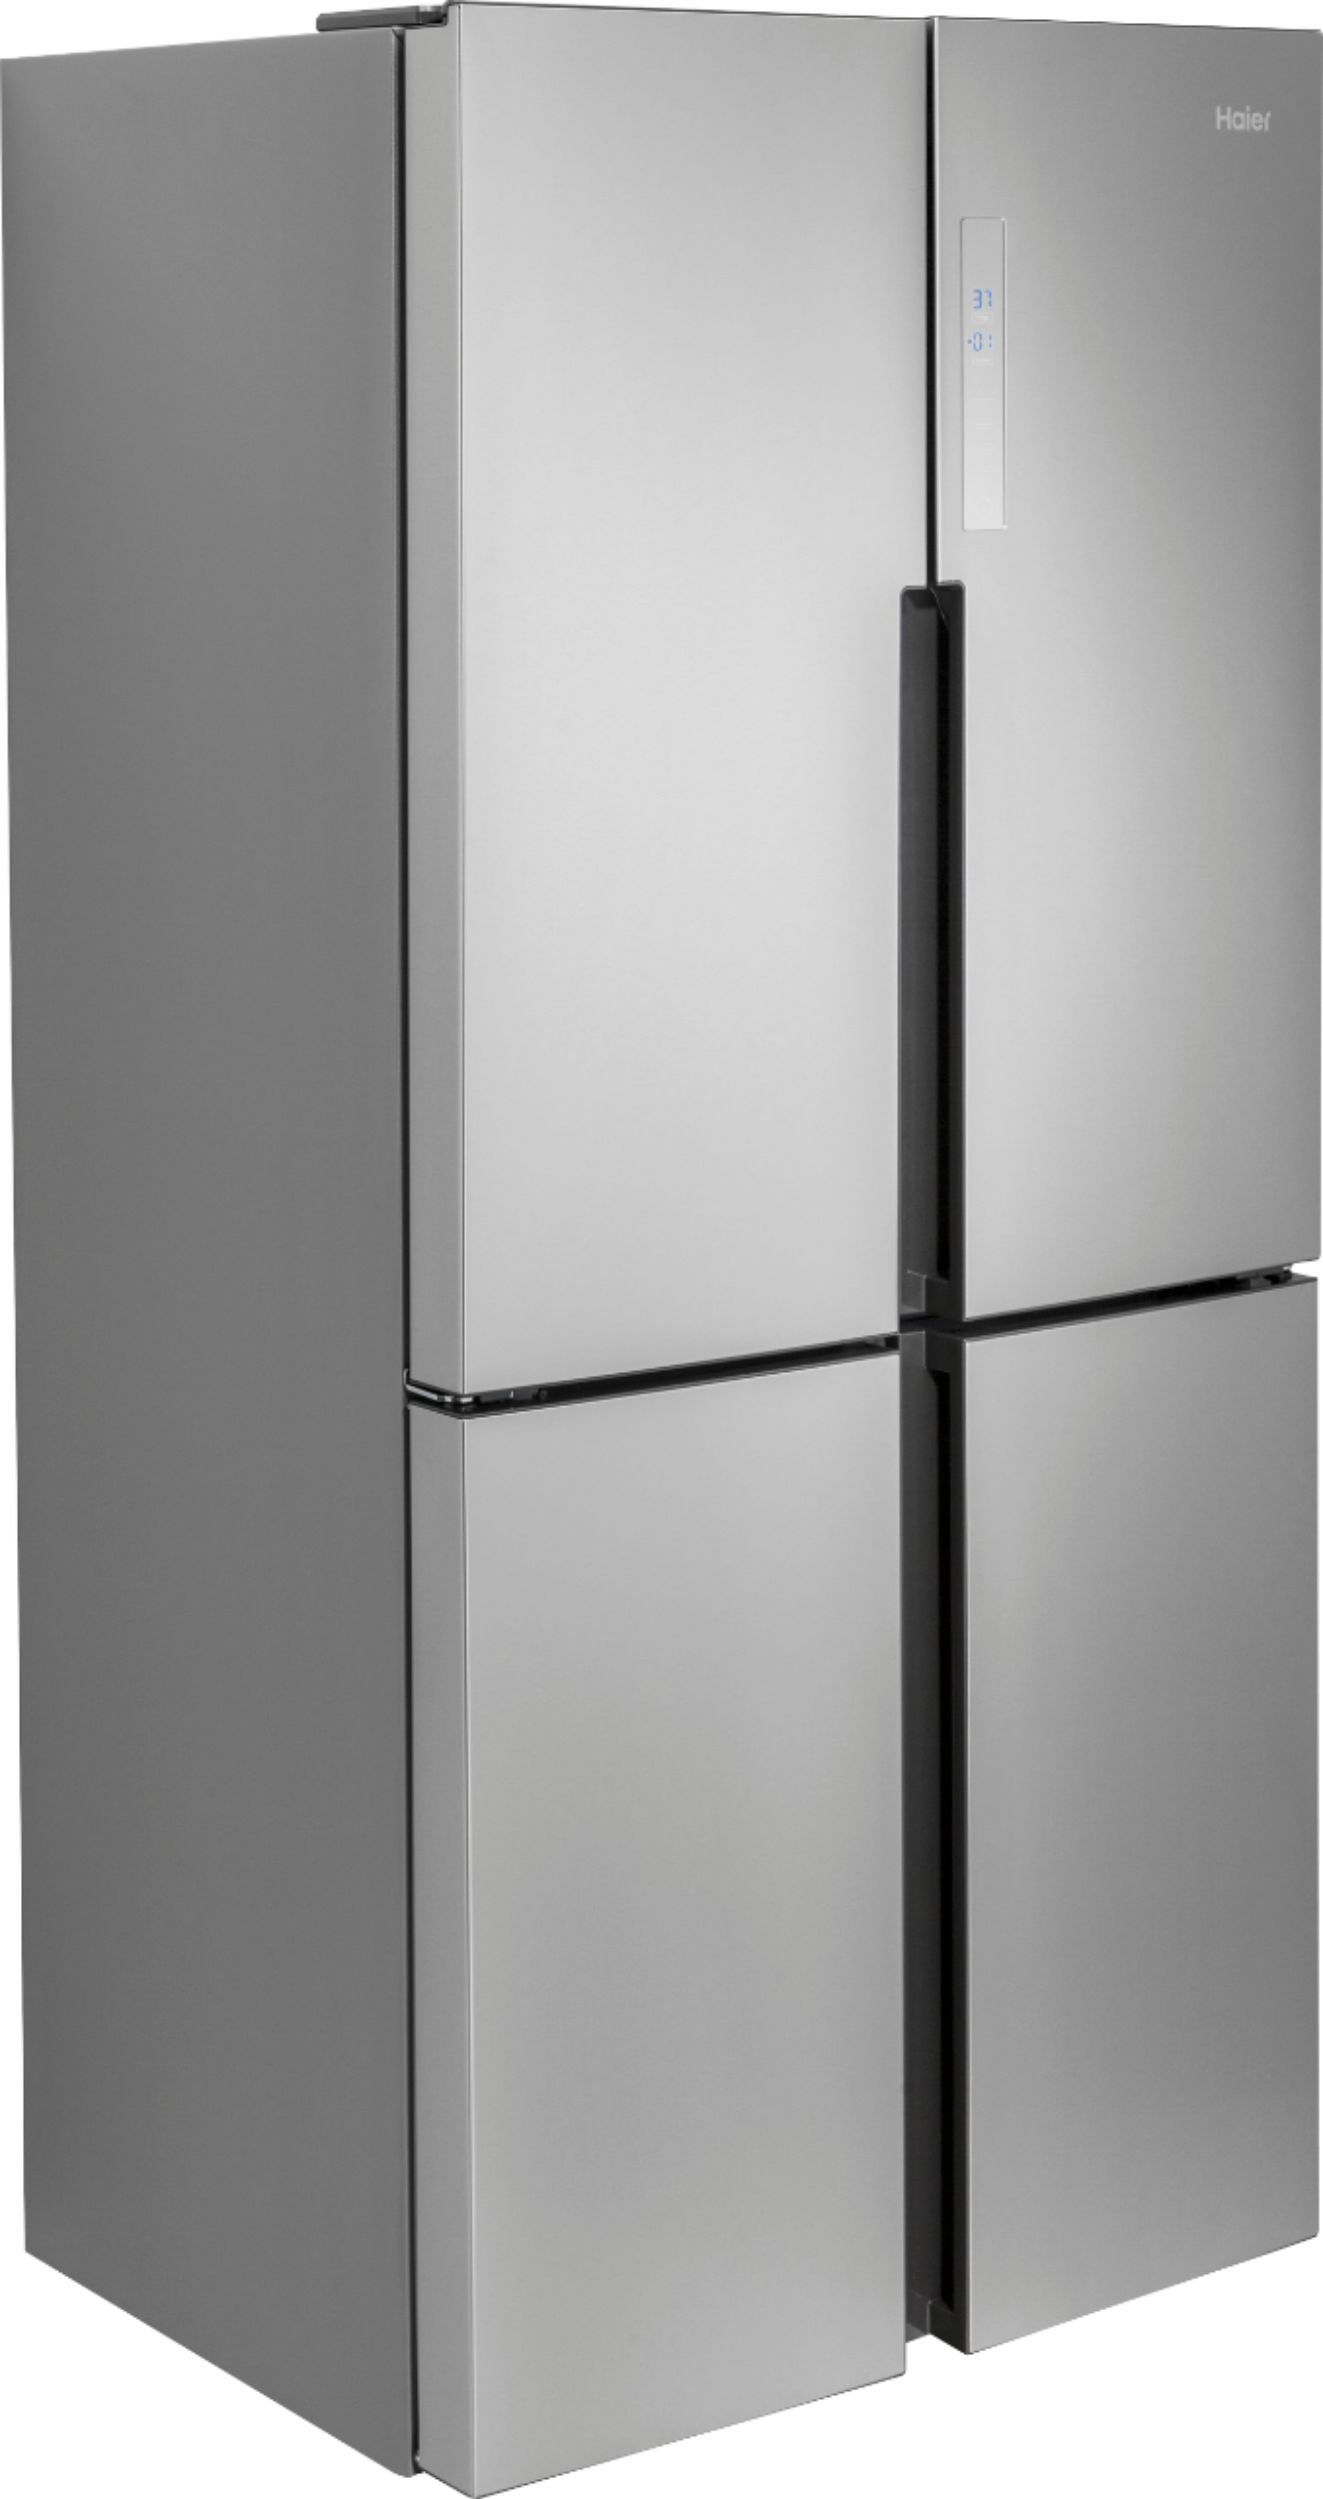 Angle View: Haier - 16.4 Cu. Ft. Counter-Depth Side-by-Side Refrigerator - Stainless steel